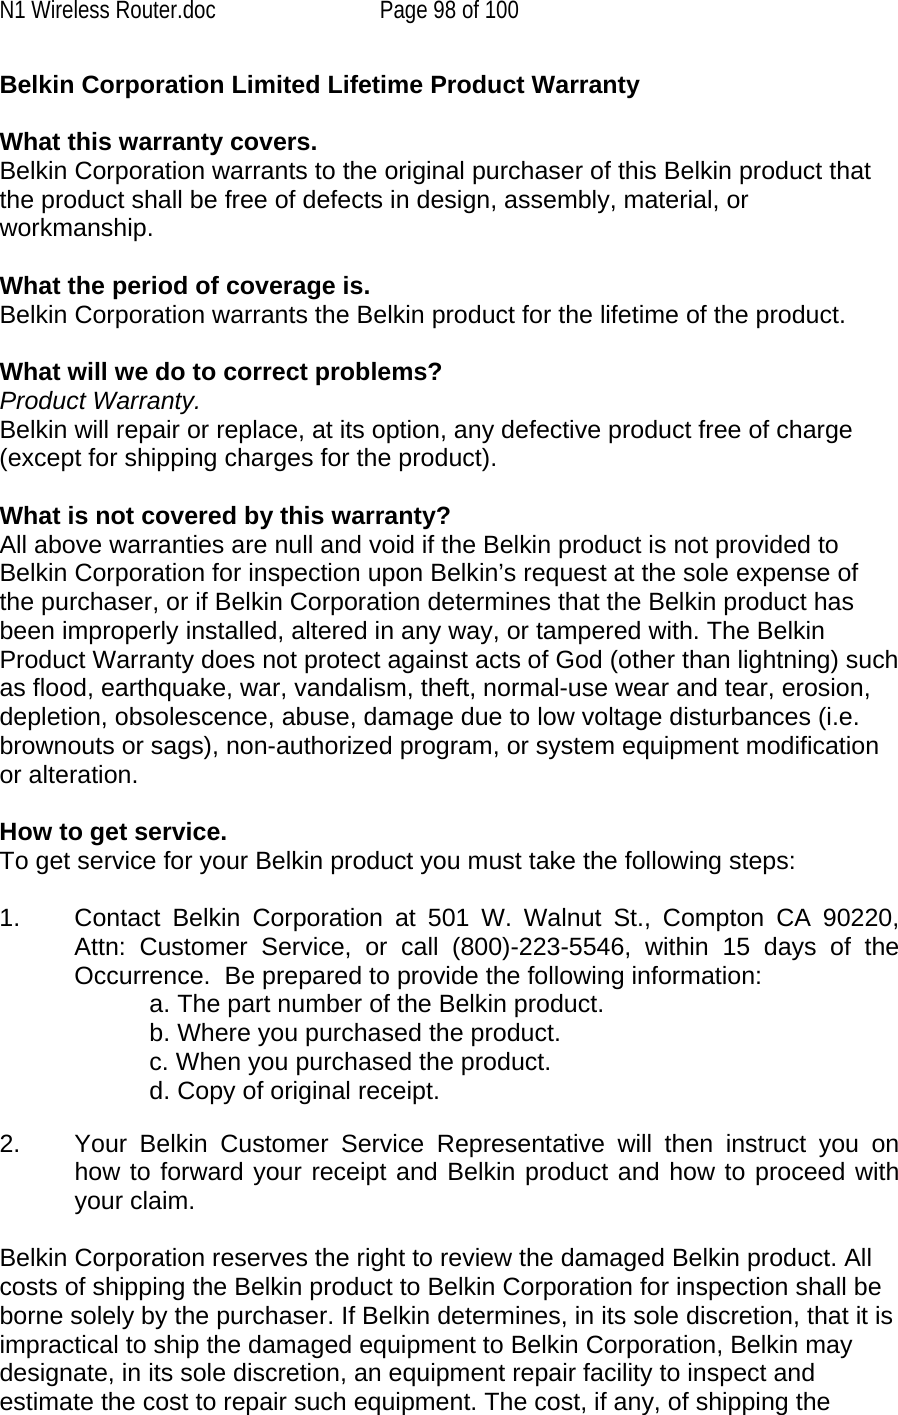 N1 Wireless Router.doc  Page 98 of 100 Belkin Corporation Limited Lifetime Product Warranty  What this warranty covers. Belkin Corporation warrants to the original purchaser of this Belkin product that the product shall be free of defects in design, assembly, material, or workmanship.   What the period of coverage is. Belkin Corporation warrants the Belkin product for the lifetime of the product.  What will we do to correct problems?  Product Warranty. Belkin will repair or replace, at its option, any defective product free of charge (except for shipping charges for the product).    What is not covered by this warranty? All above warranties are null and void if the Belkin product is not provided to Belkin Corporation for inspection upon Belkin’s request at the sole expense of the purchaser, or if Belkin Corporation determines that the Belkin product has been improperly installed, altered in any way, or tampered with. The Belkin Product Warranty does not protect against acts of God (other than lightning) such as flood, earthquake, war, vandalism, theft, normal-use wear and tear, erosion, depletion, obsolescence, abuse, damage due to low voltage disturbances (i.e. brownouts or sags), non-authorized program, or system equipment modification or alteration.  How to get service.    To get service for your Belkin product you must take the following steps:  1.  Contact Belkin Corporation at 501 W. Walnut St., Compton CA 90220, Attn: Customer Service, or call (800)-223-5546, within 15 days of the Occurrence.  Be prepared to provide the following information: a. The part number of the Belkin product. b. Where you purchased the product. c. When you purchased the product. d. Copy of original receipt.  2.  Your Belkin Customer Service Representative will then instruct you on how to forward your receipt and Belkin product and how to proceed with your claim.  Belkin Corporation reserves the right to review the damaged Belkin product. All costs of shipping the Belkin product to Belkin Corporation for inspection shall be borne solely by the purchaser. If Belkin determines, in its sole discretion, that it is impractical to ship the damaged equipment to Belkin Corporation, Belkin may designate, in its sole discretion, an equipment repair facility to inspect and estimate the cost to repair such equipment. The cost, if any, of shipping the 